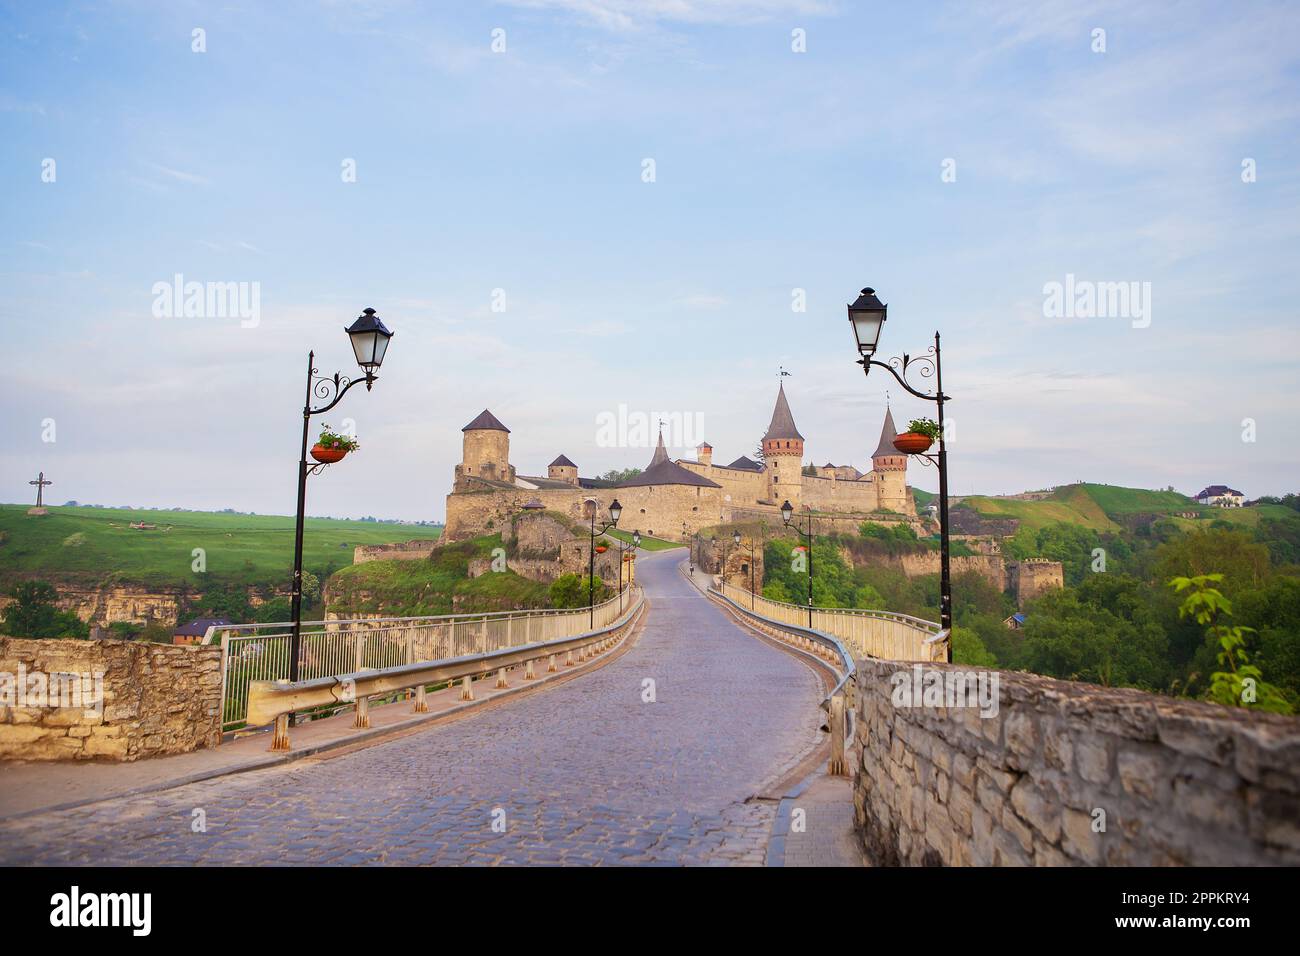 Kamianets-Podilskyi is a romantic city. A picturesque summer view of the ancient castle-fortress in Kamianets-Podilskyi, Khmelnytskyi region, Ukraine. Stock Photo